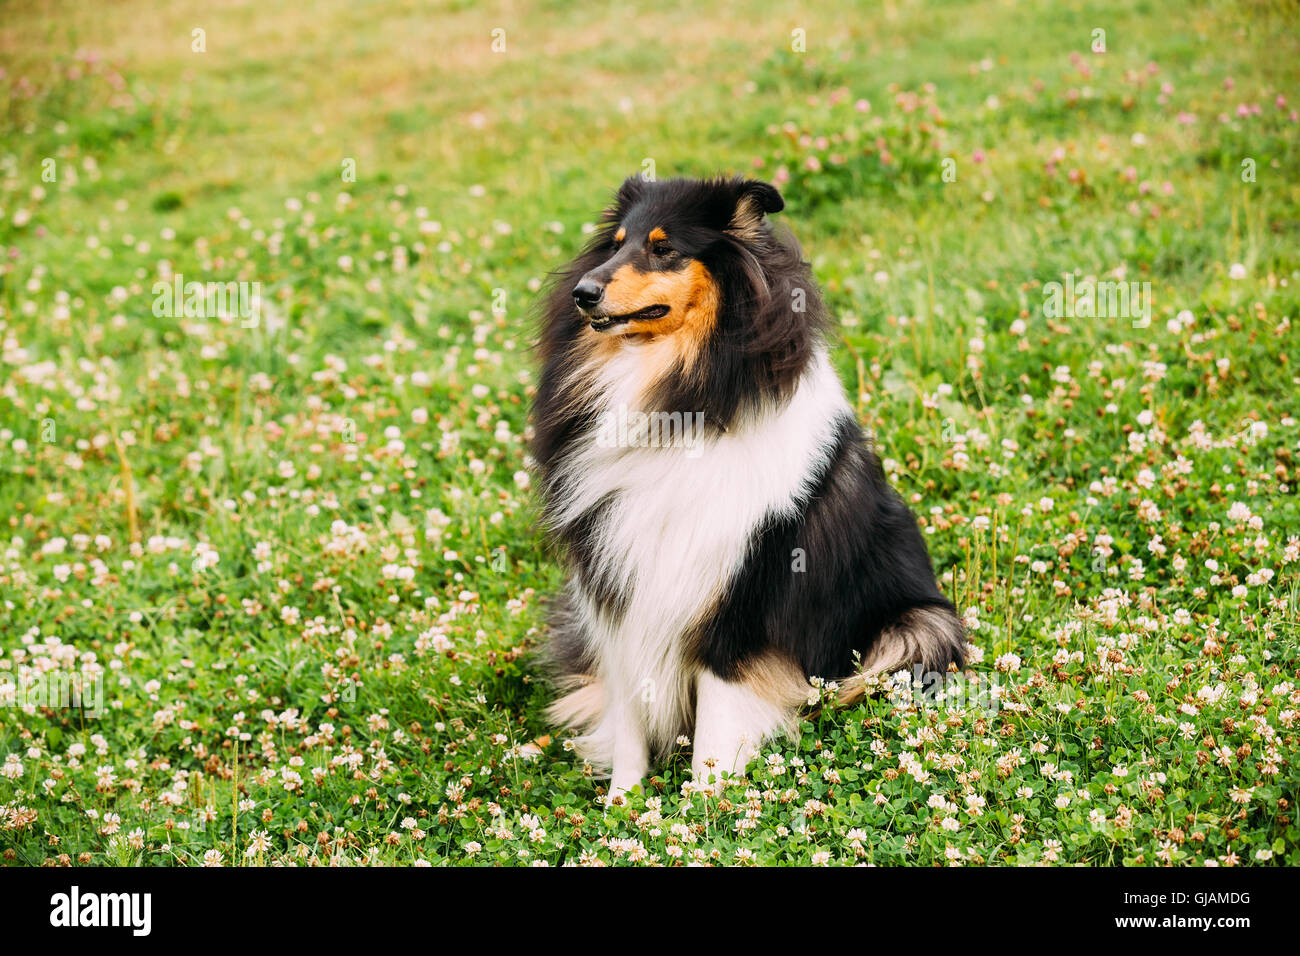 The Tricolor Rough Collie, Scottish Collie, Long-Haired Collie, English Collie, Lassie Adult Dog Sitting On The Clover Glade. Stock Photo